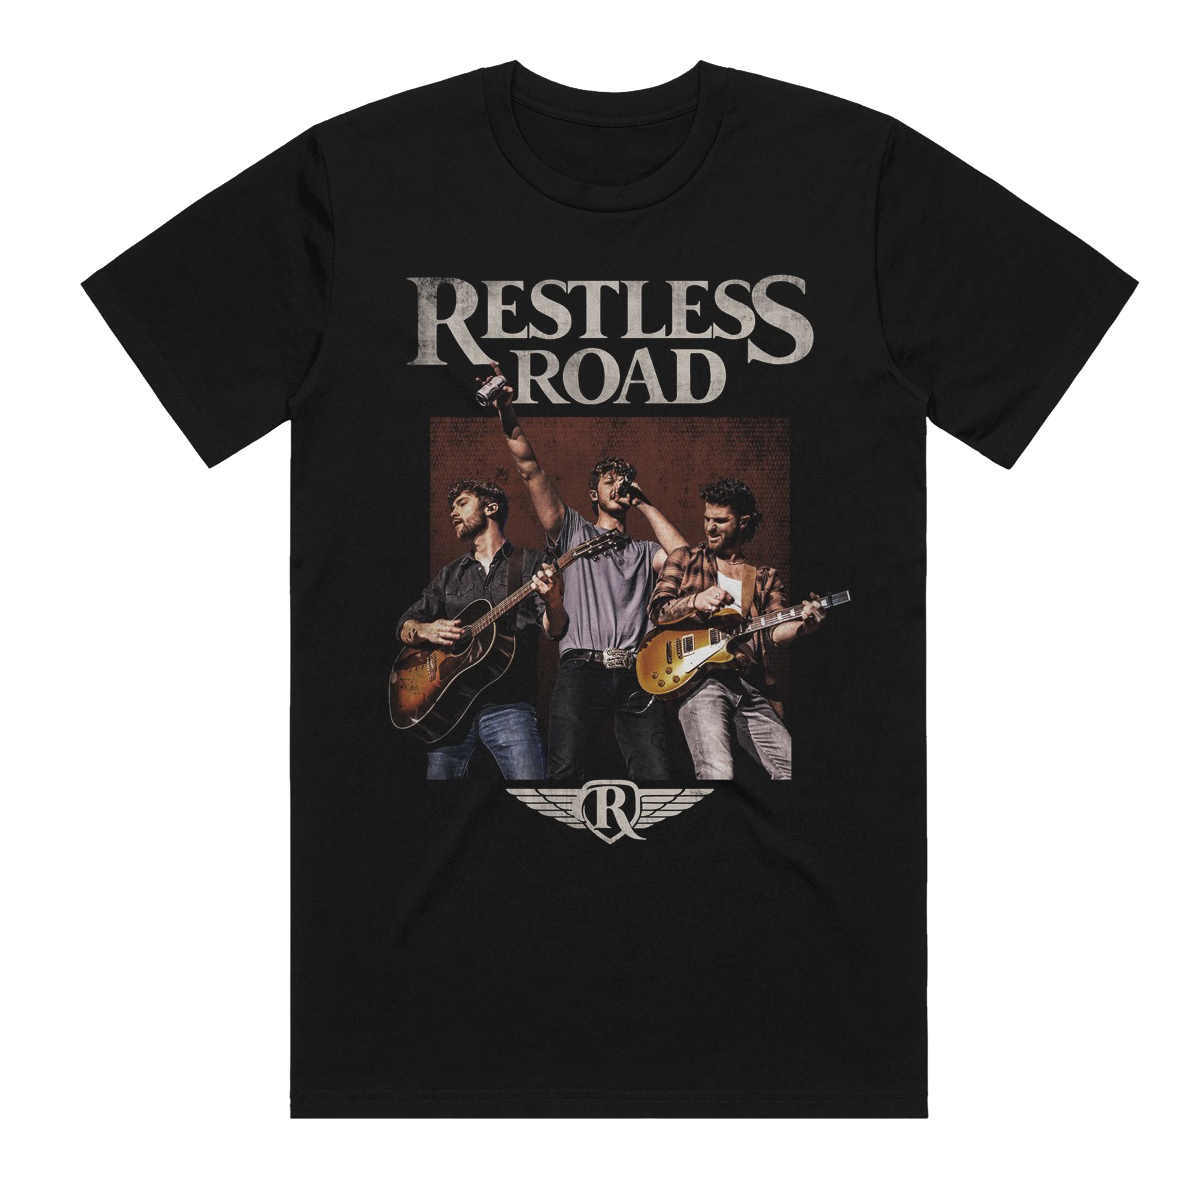 Bar friends photo black tour tee front Restless Road